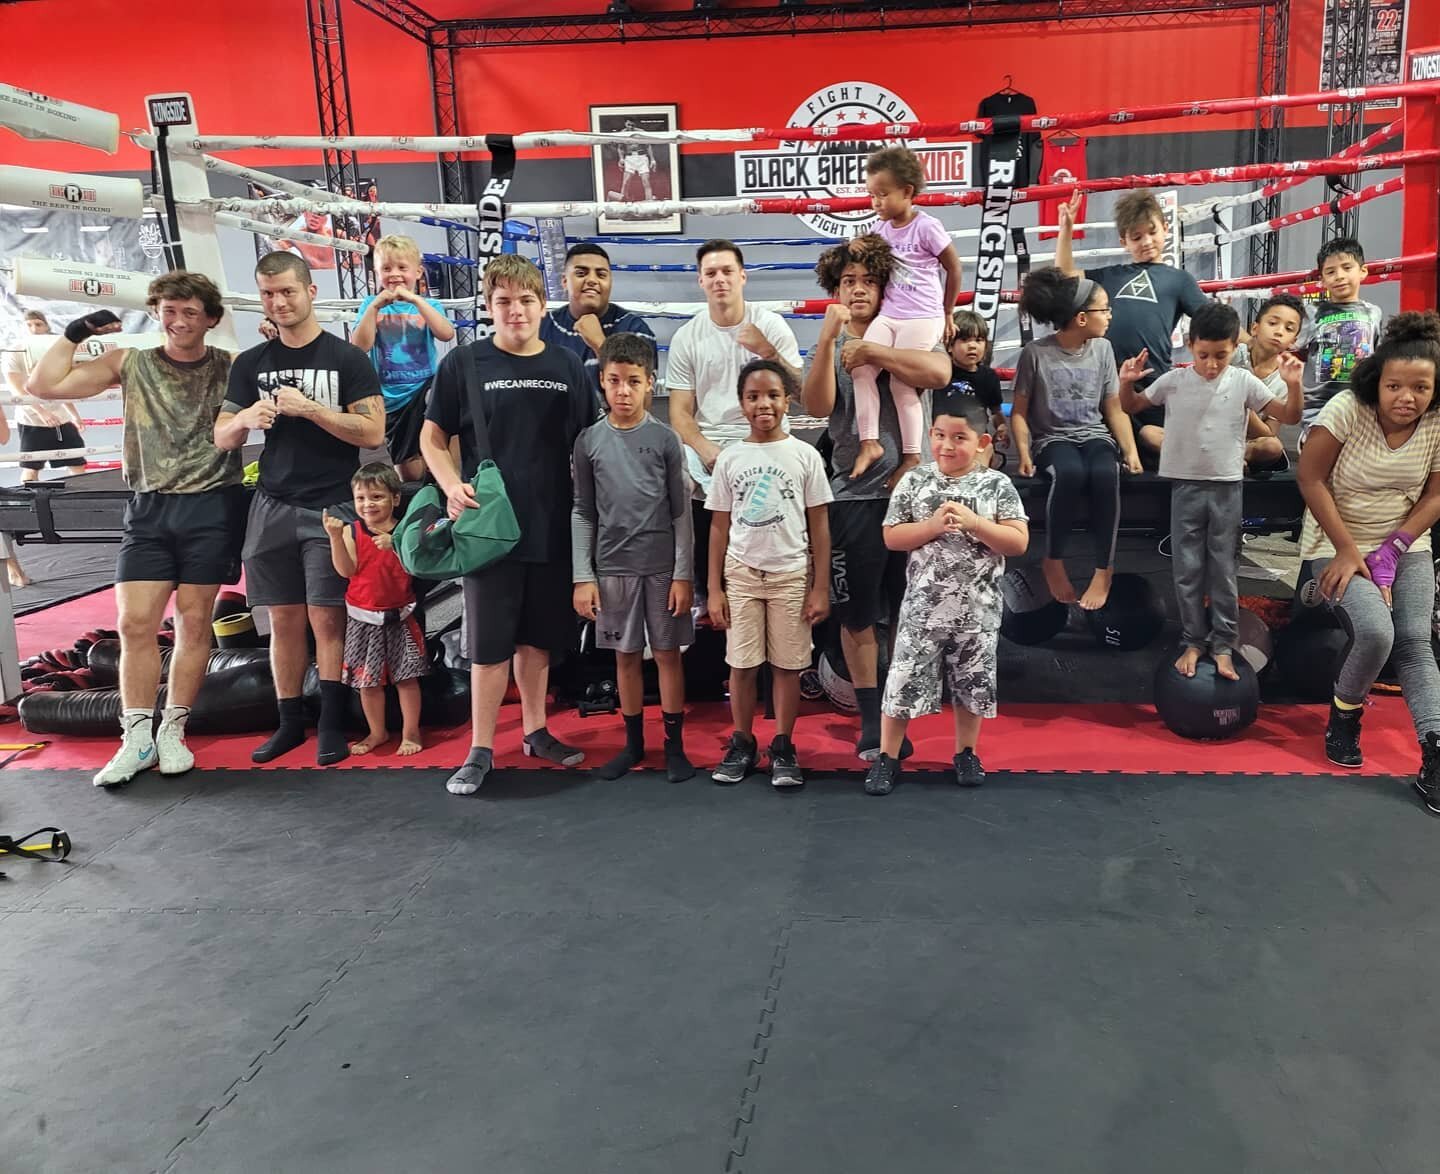 🥊TODAY KIDS BOXING &amp; MUAY THAI 🥊
 4:45pm to 5:45pm first class is free! 
 
Come be apart of the family 👊

#kids #KidsThatBox #LittleWarriorProgram #inspire #NewHealthyHabbits